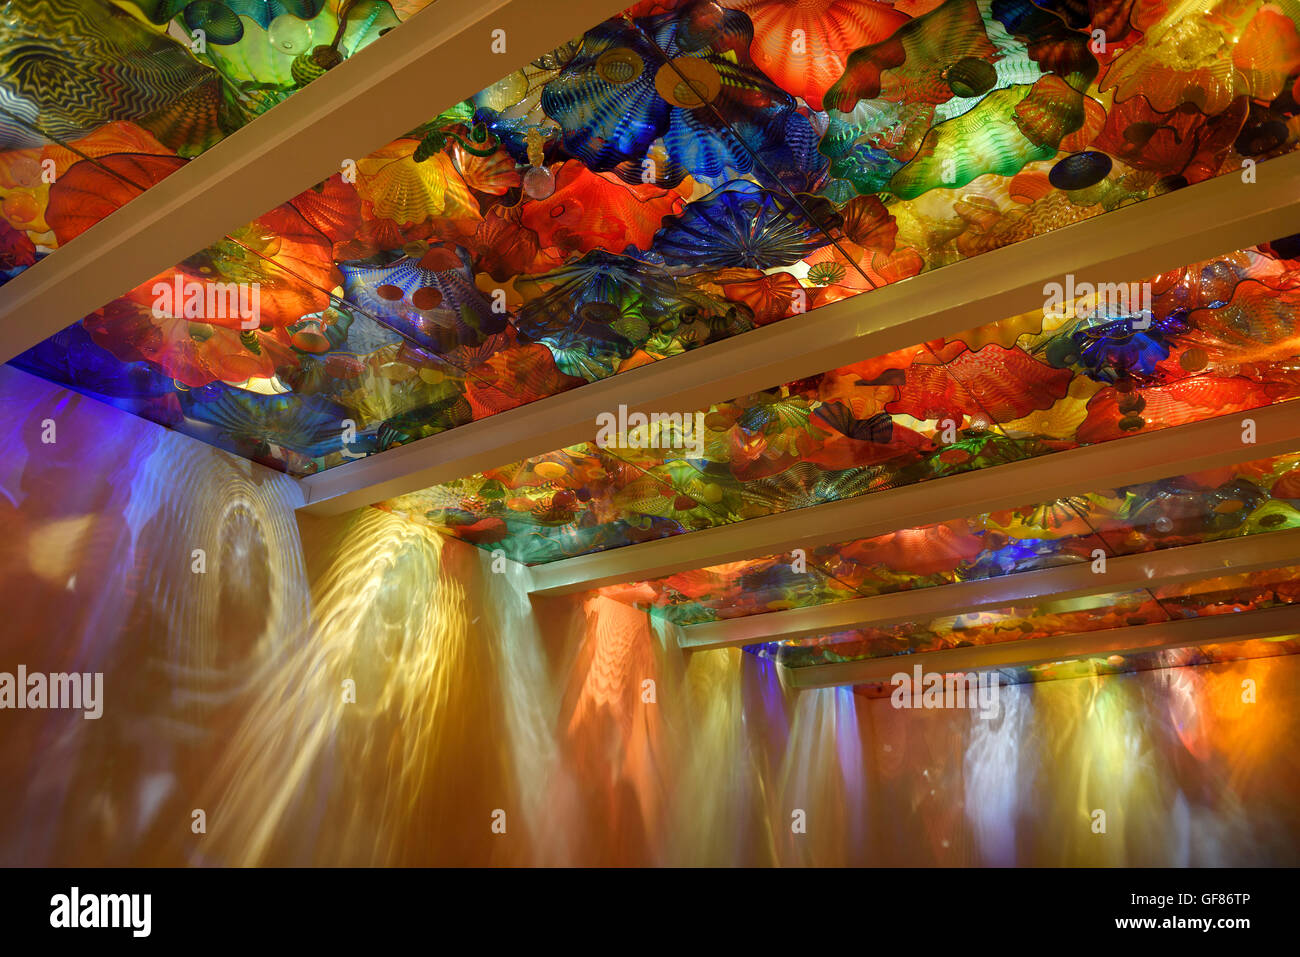 Light patterns in room with plate glass ceiling of Chihuly art ROM Toronto Stock Photo